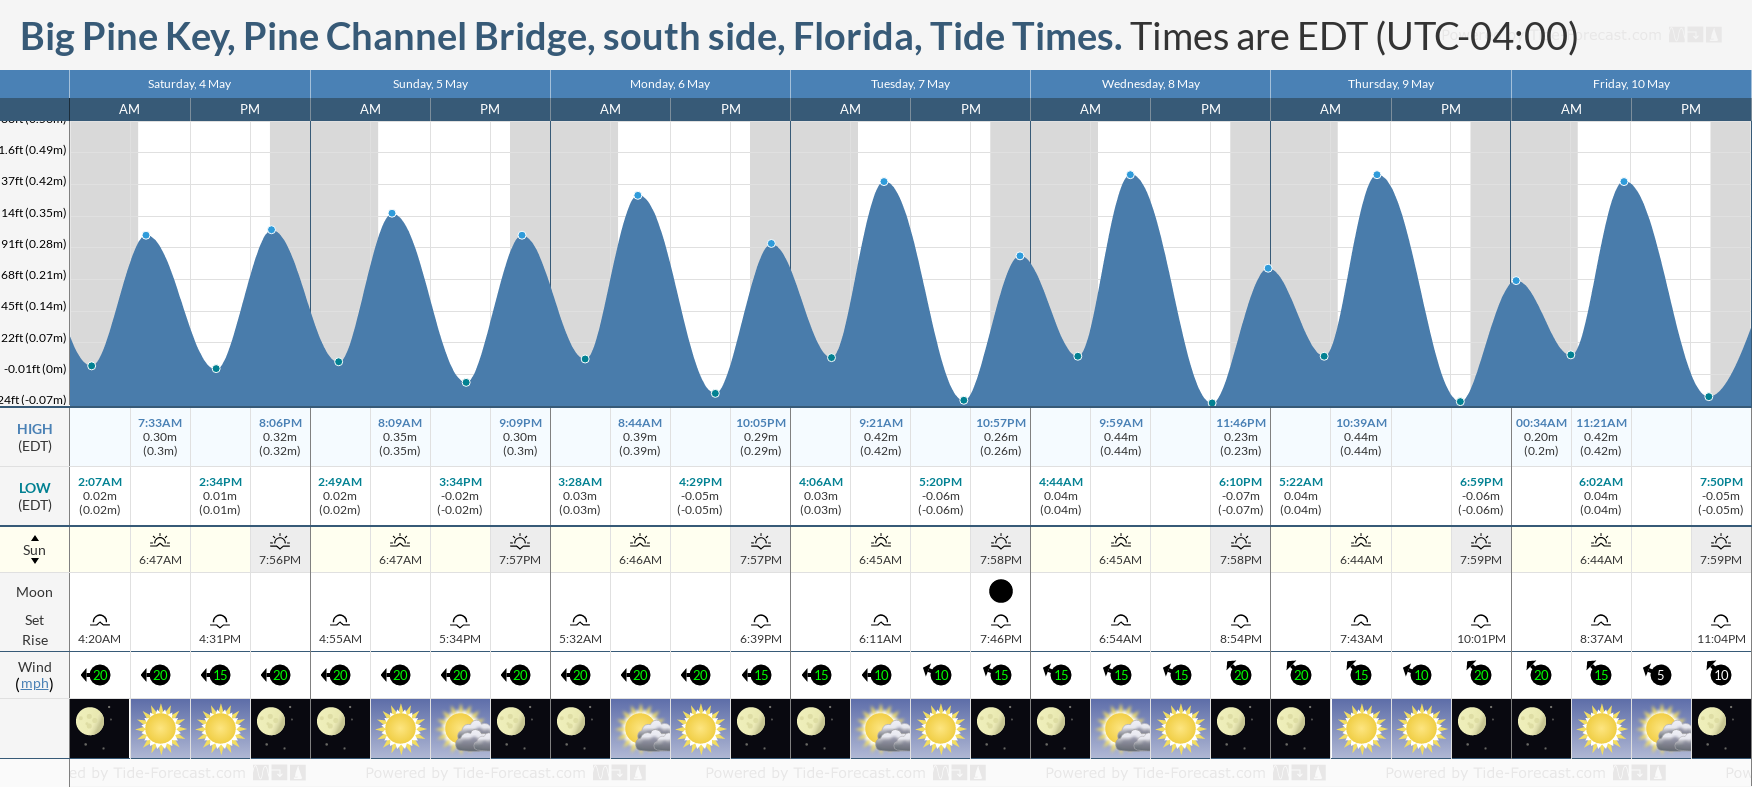 Big Pine Key, Pine Channel Bridge, south side, Florida Tide Chart including high and low tide tide times for the next 7 days